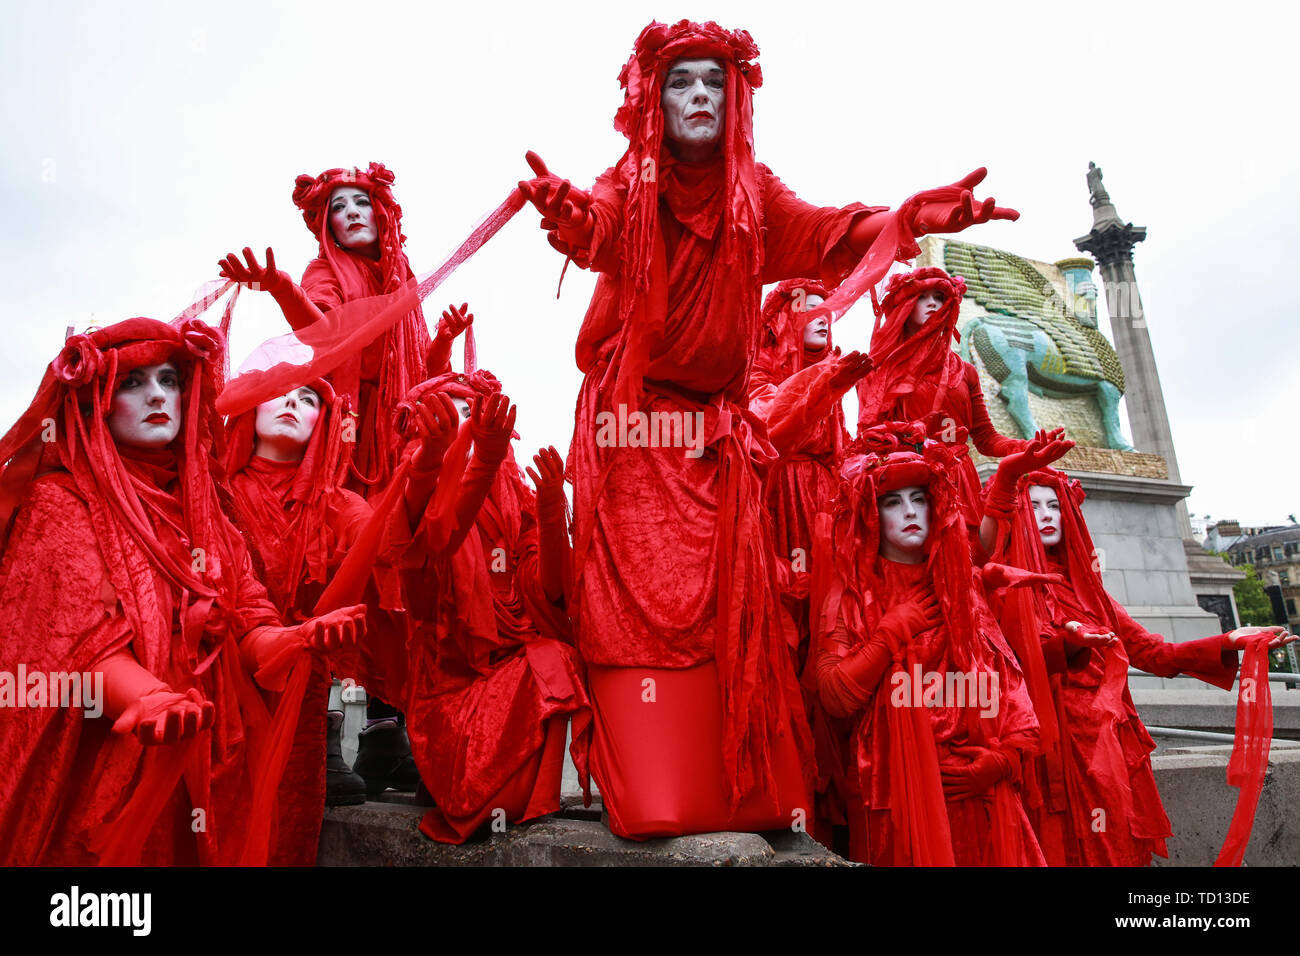 London, UK. 11 June, 2019. The Blood of the Extinction theatrical group join fellow activists from Extinction Rebellion in disrupting the Royal Opera House BP Big Screen’s Romeo and Juliet event in Trafalgar Square in protest against oil sponsorship of the arts. Activists at the ‘Petroleo and Fueliet’ protest highlighted the contradiction between the Government and Greater London Authority having declared a climate emergency and BP being given a platform to sponsor the Royal Opera House event in the heart of London. Credit: Mark Kerrison/Alamy Live News Stock Photo